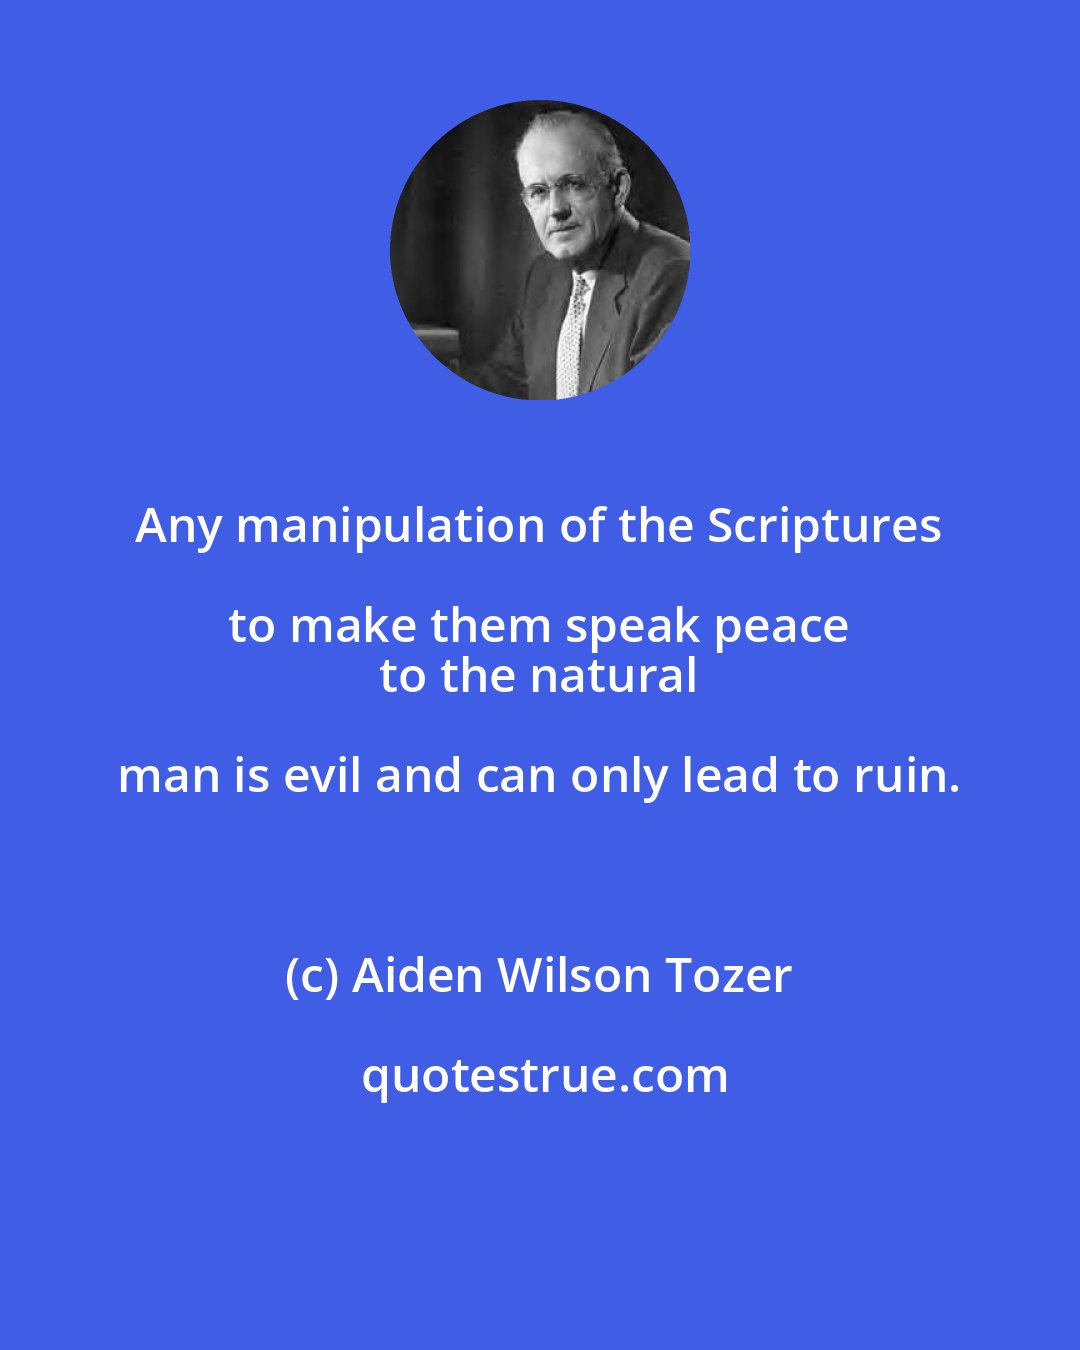 Aiden Wilson Tozer: Any manipulation of the Scriptures to make them speak peace 
 to the natural man is evil and can only lead to ruin.